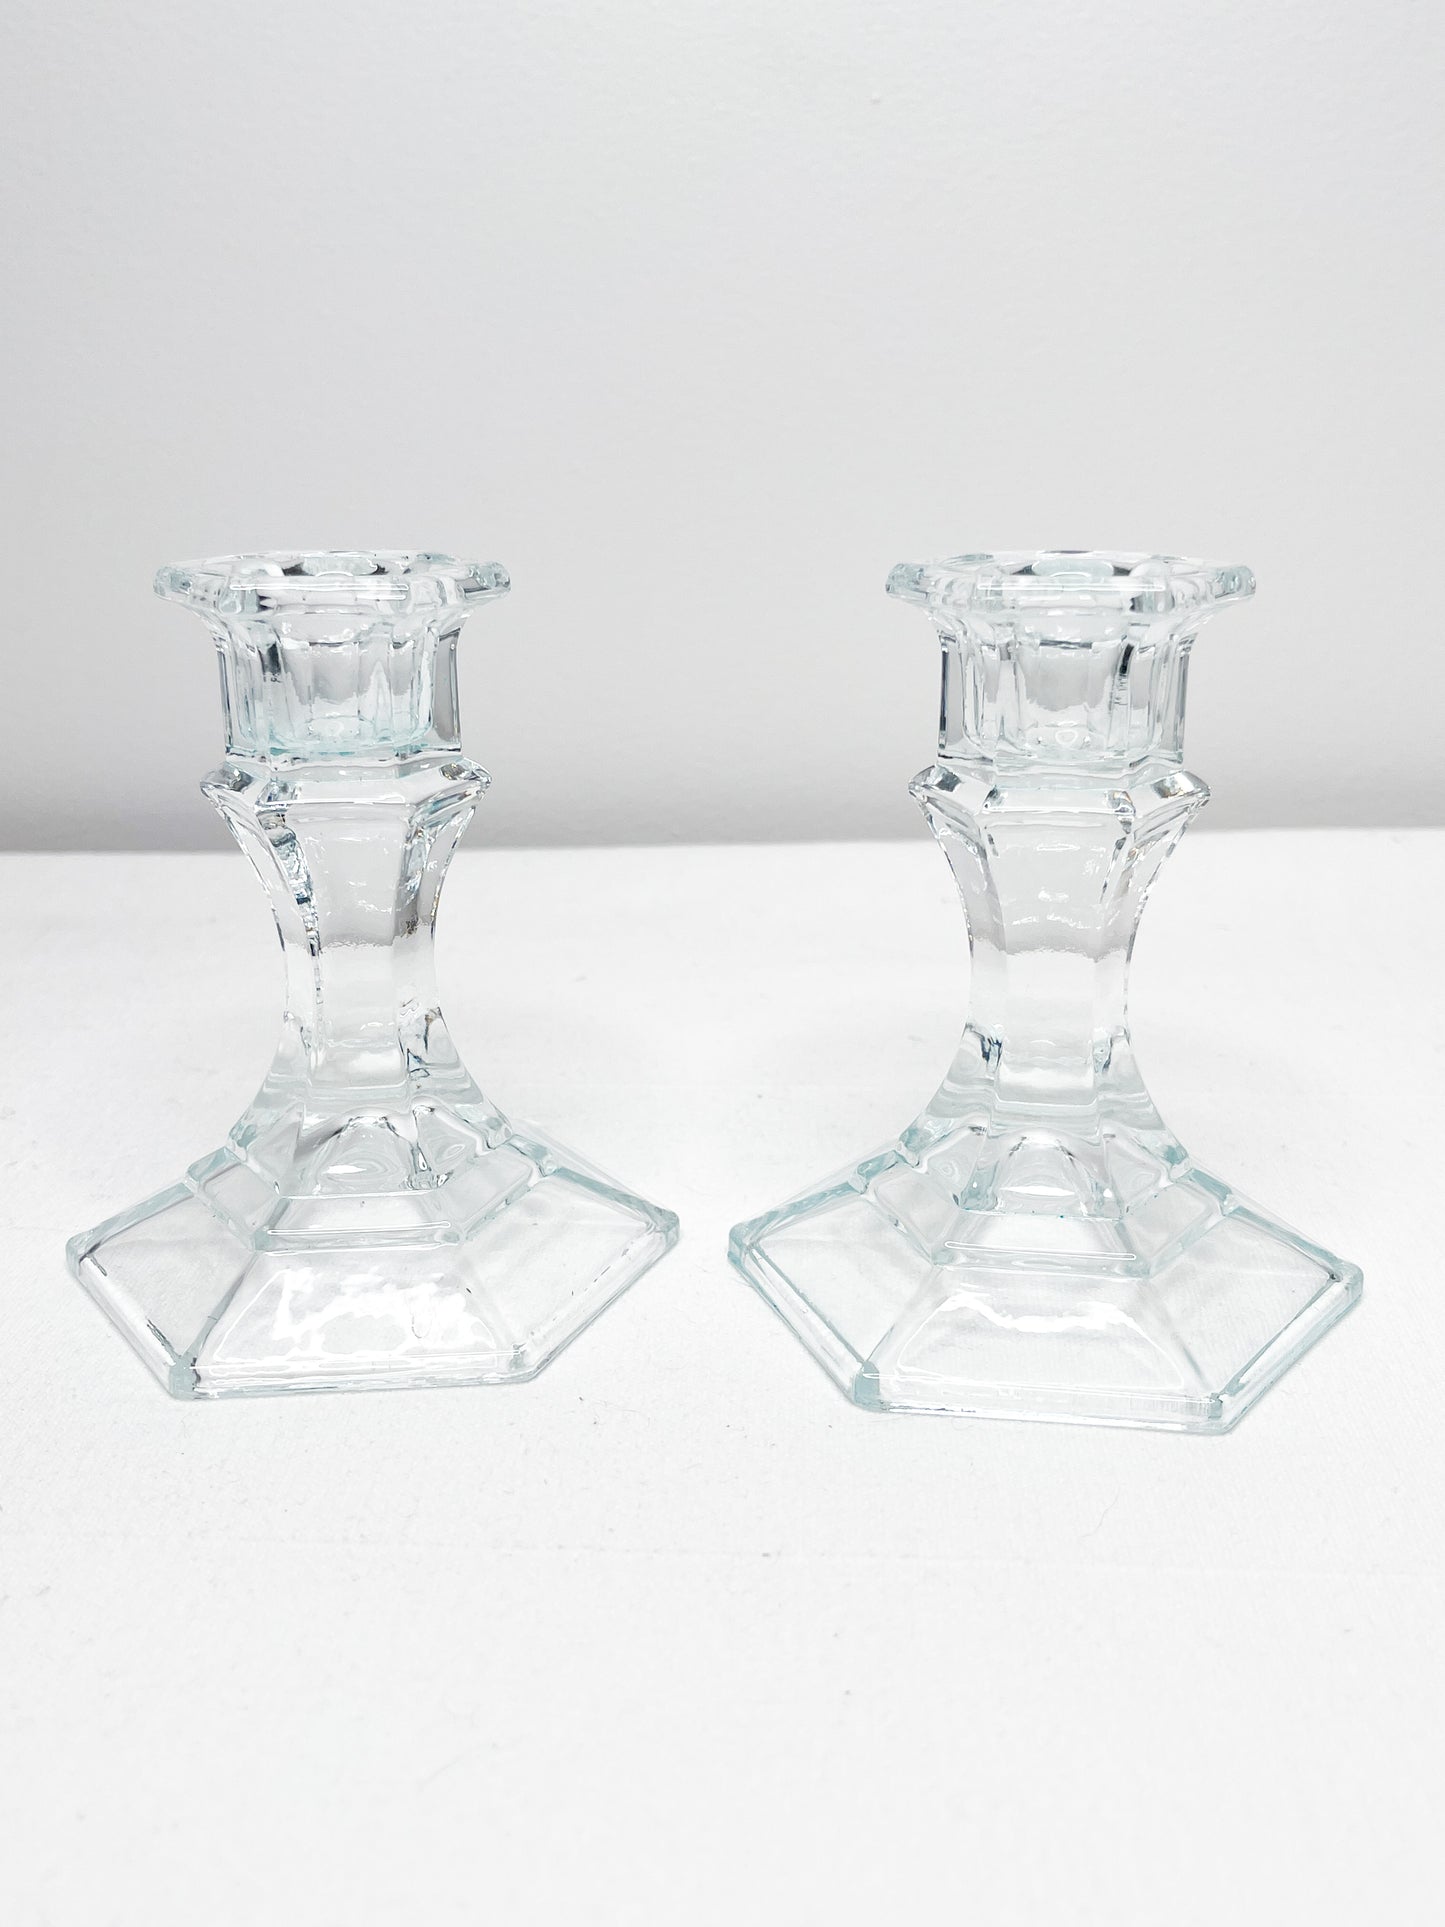 Pair of  Glass Tapered Candle Holders| Vintage Tapered Candle Holders|